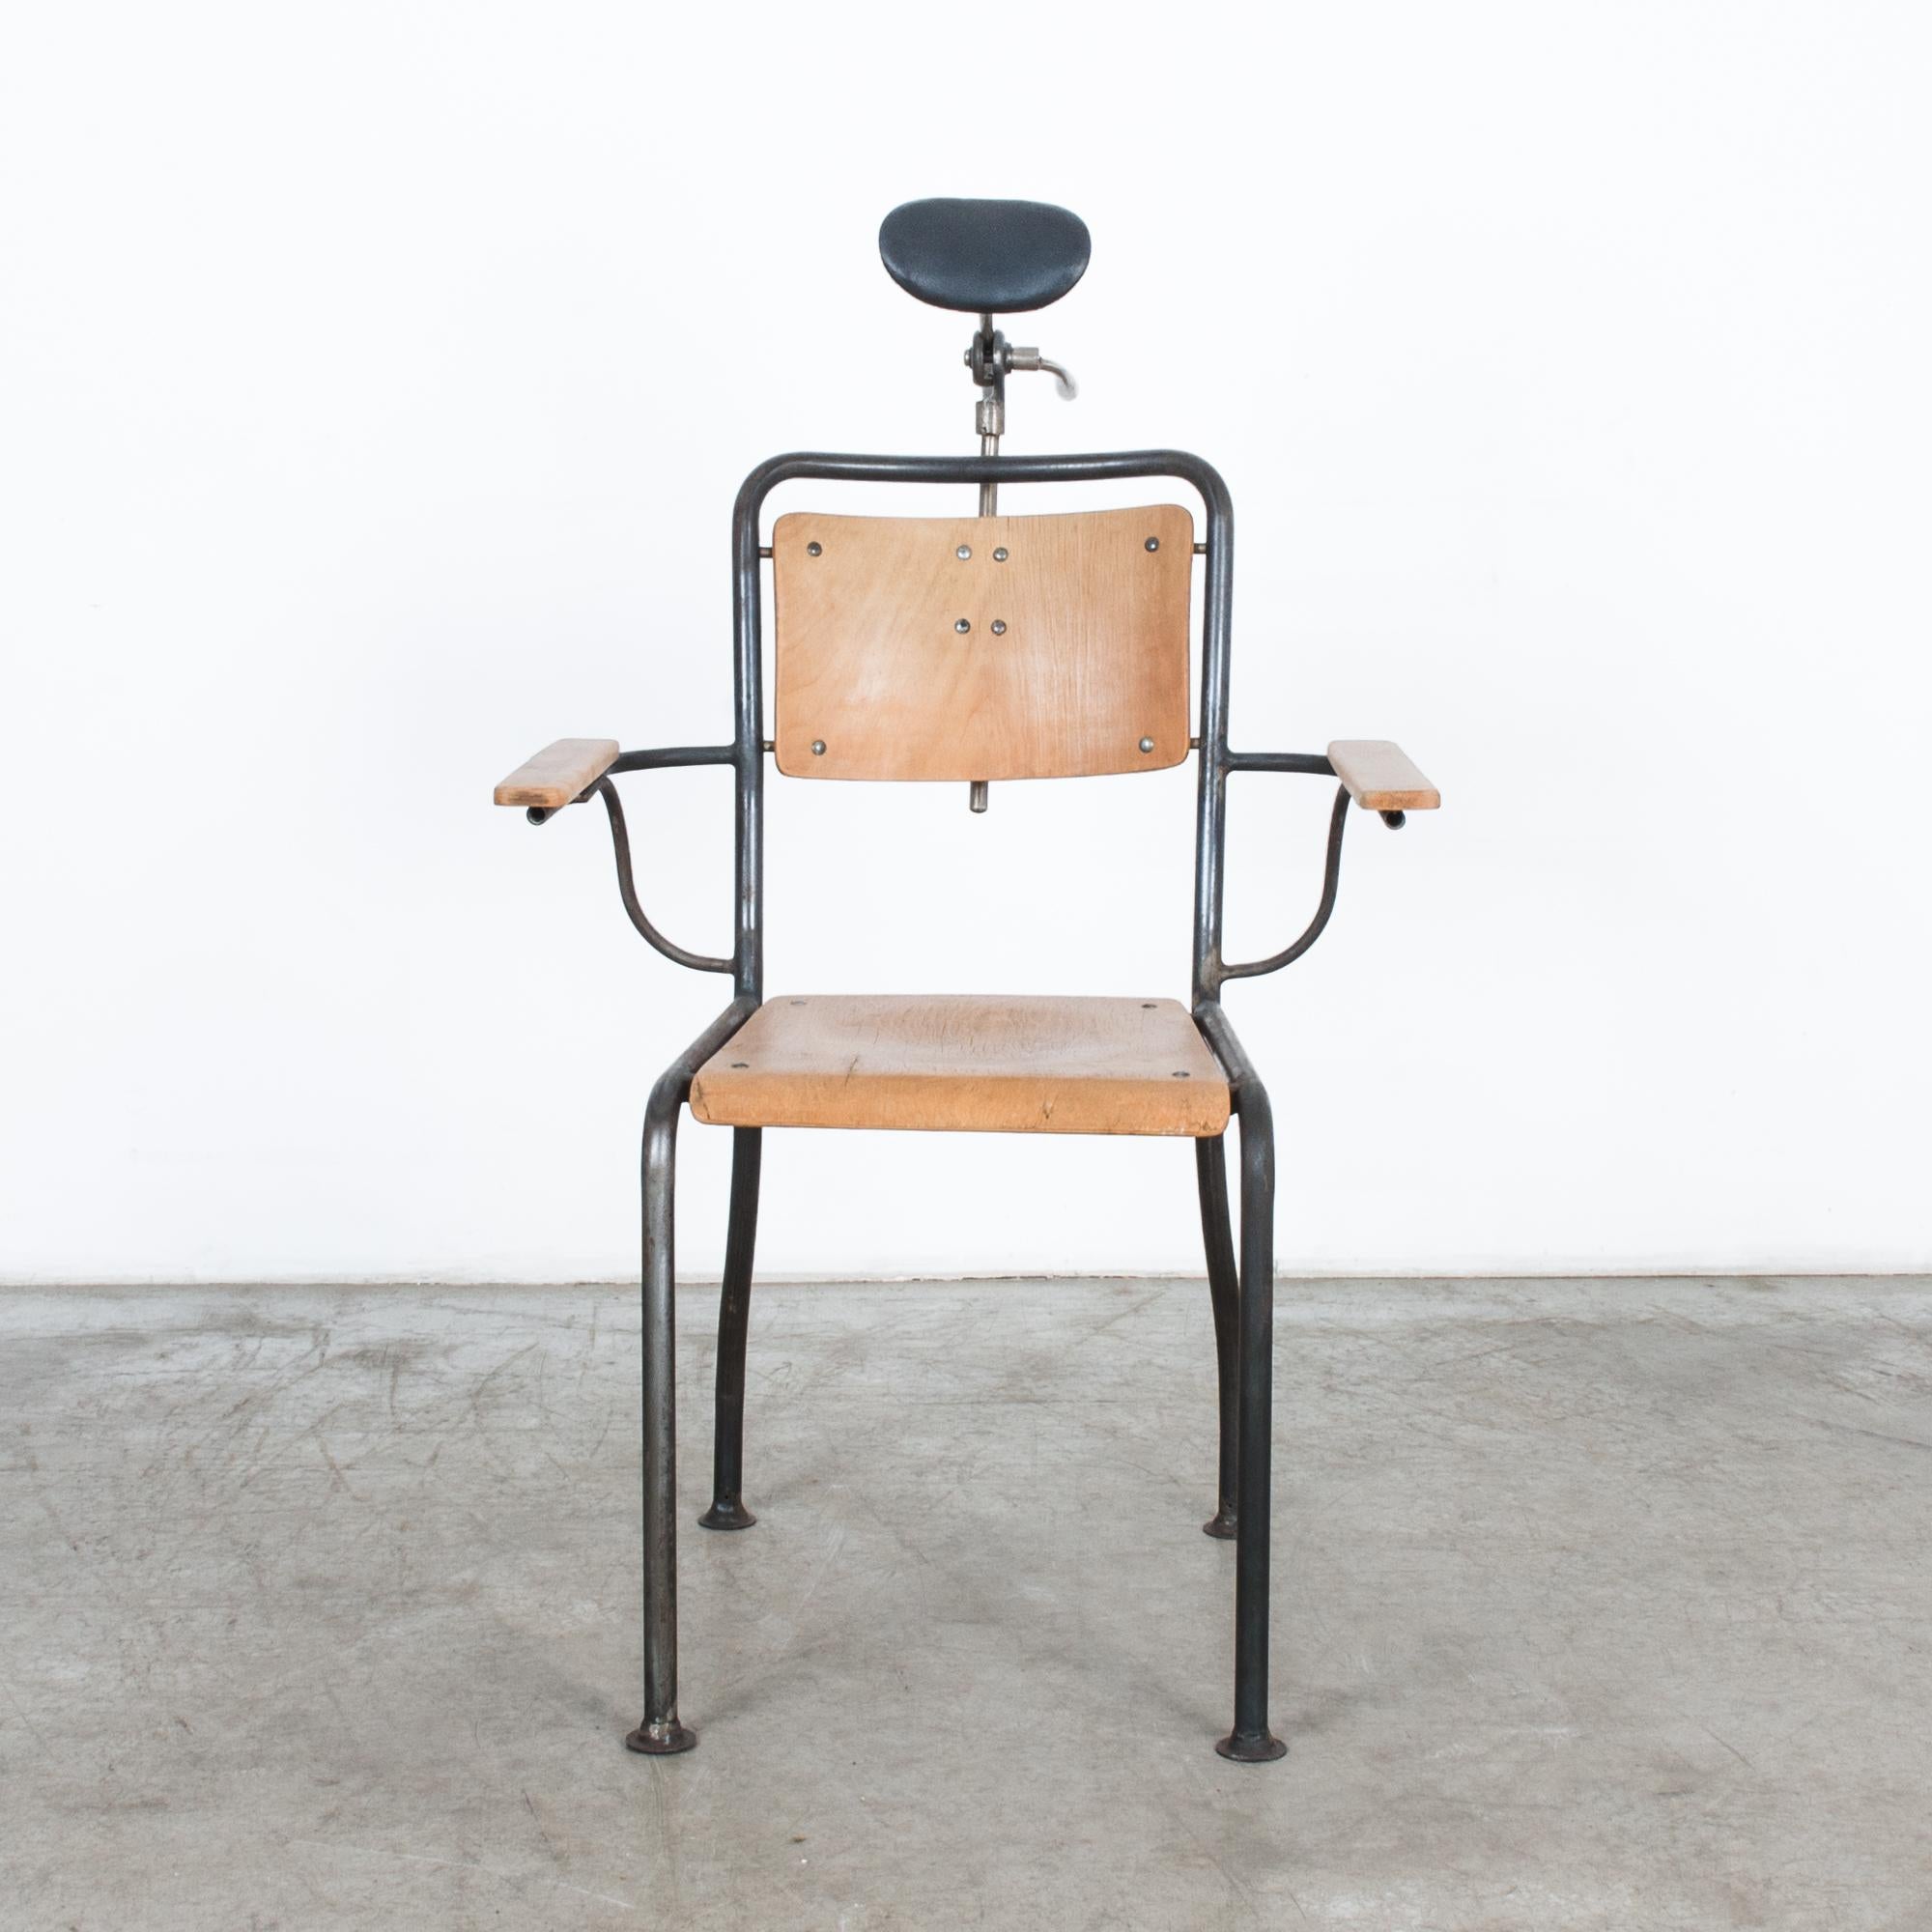 In the progressive era of 1960s Germany, this metal dentist armchair epitomizes the blend of functionality and modern design prevalent during the period. Crafted with precision engineering and attention to detail, this chair reflects the innovative